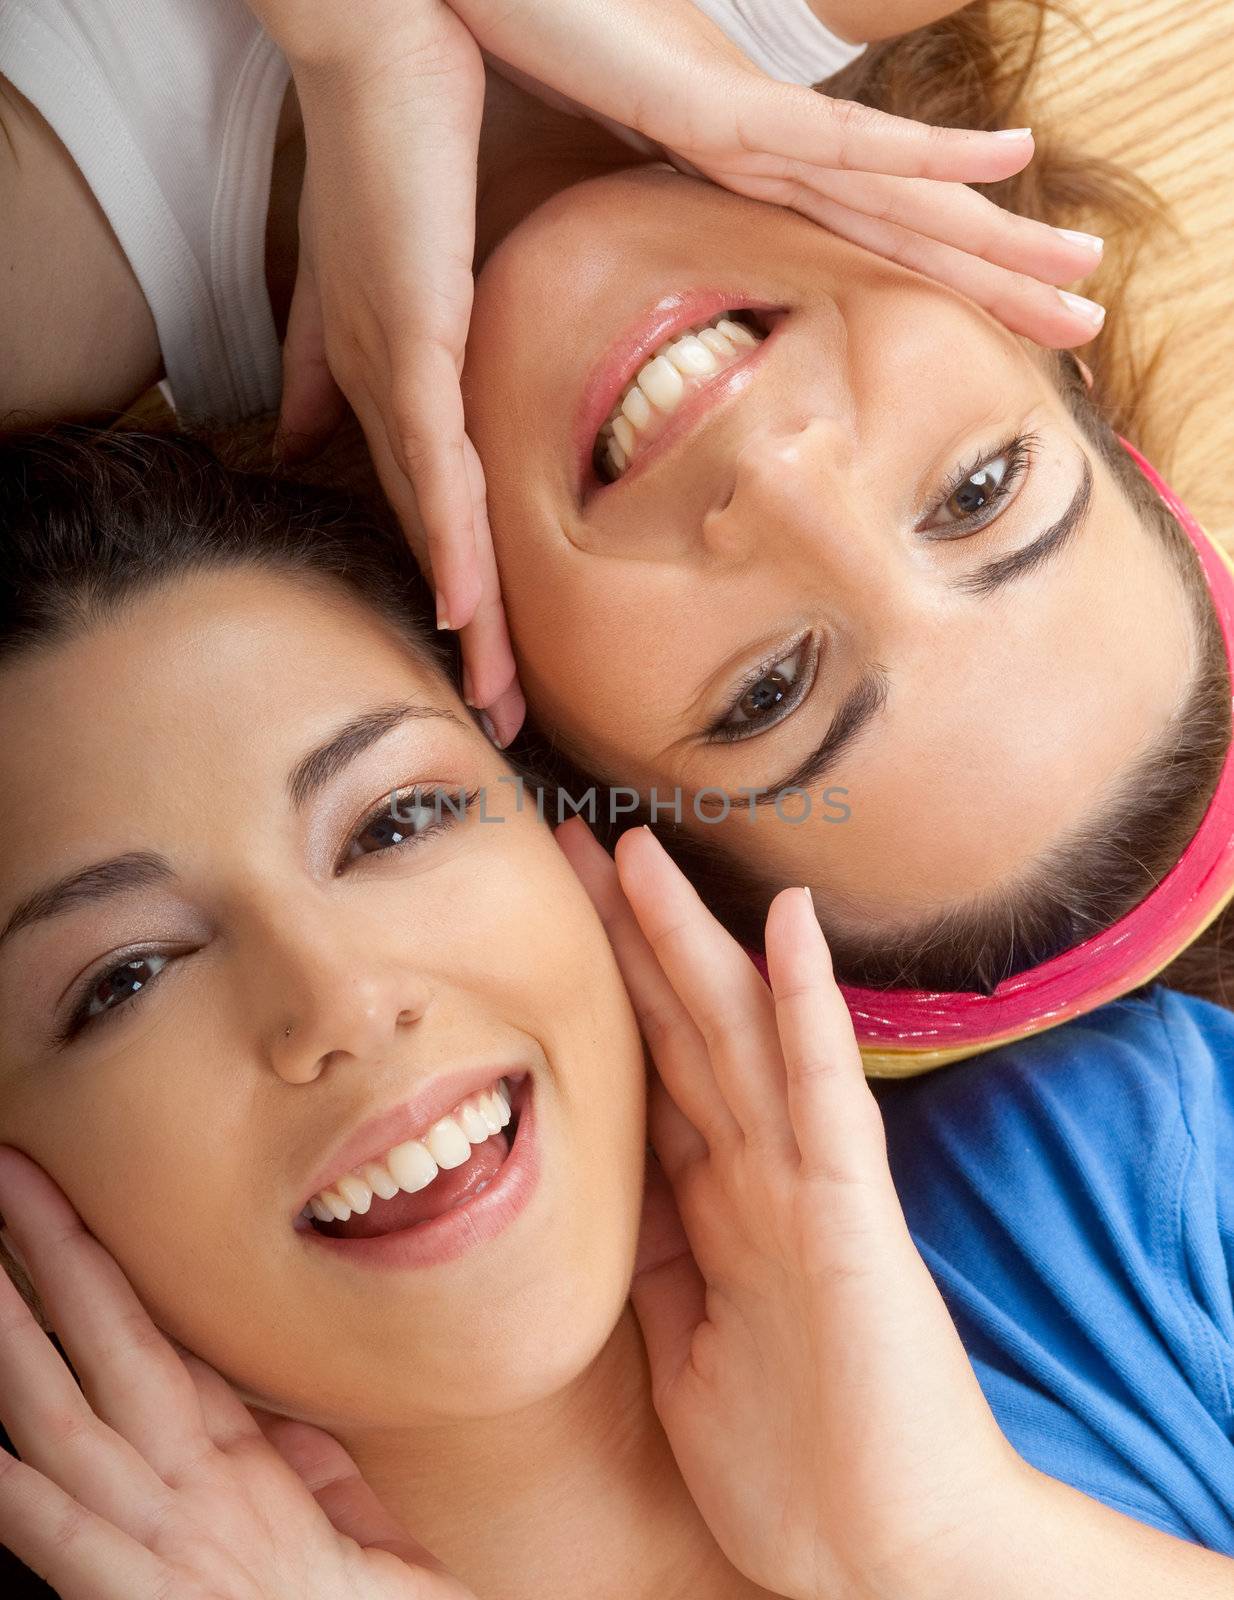 Portraits of two beautiful young women on the floor